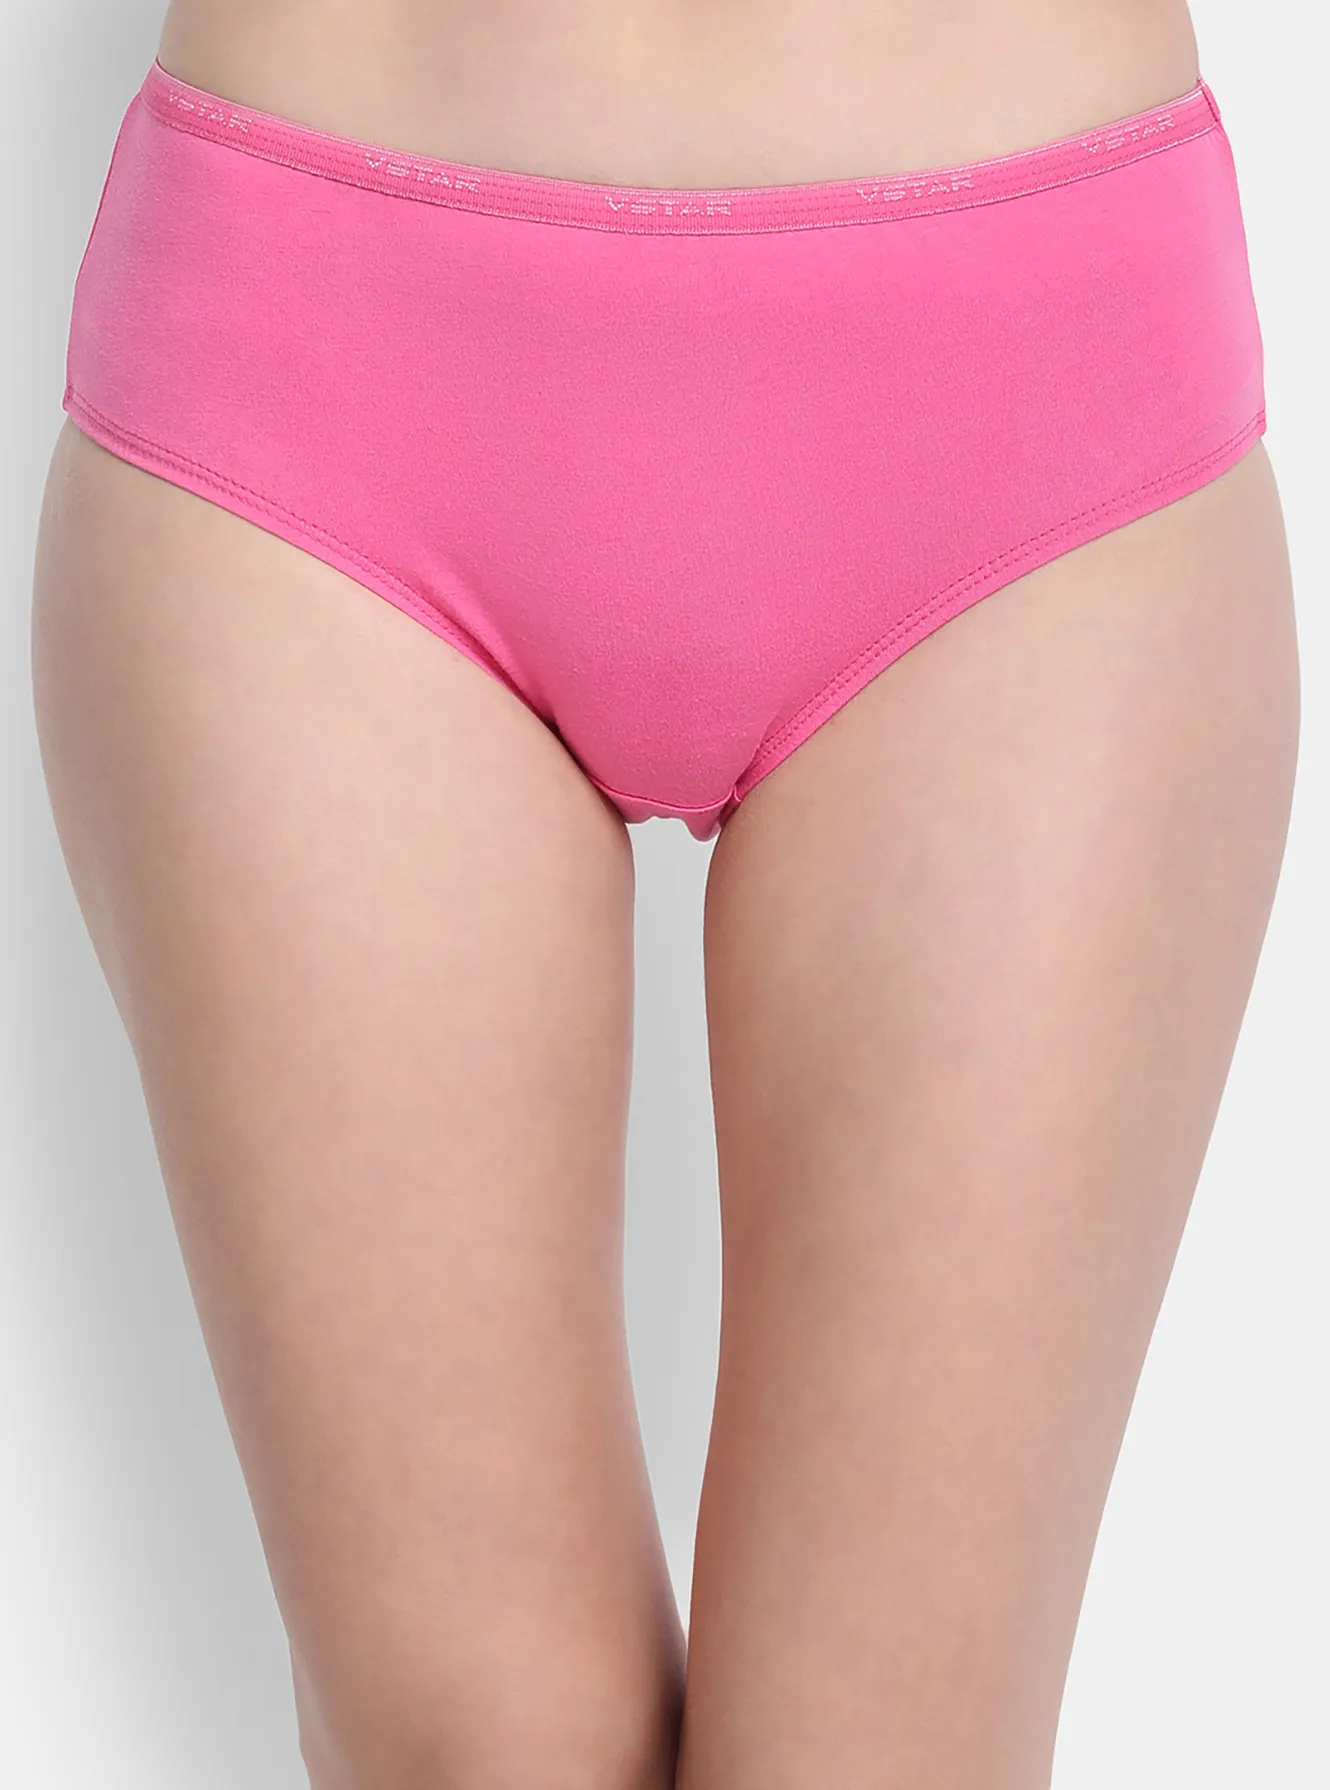 High rise, hipster cut panty with thin outer elastic waistband